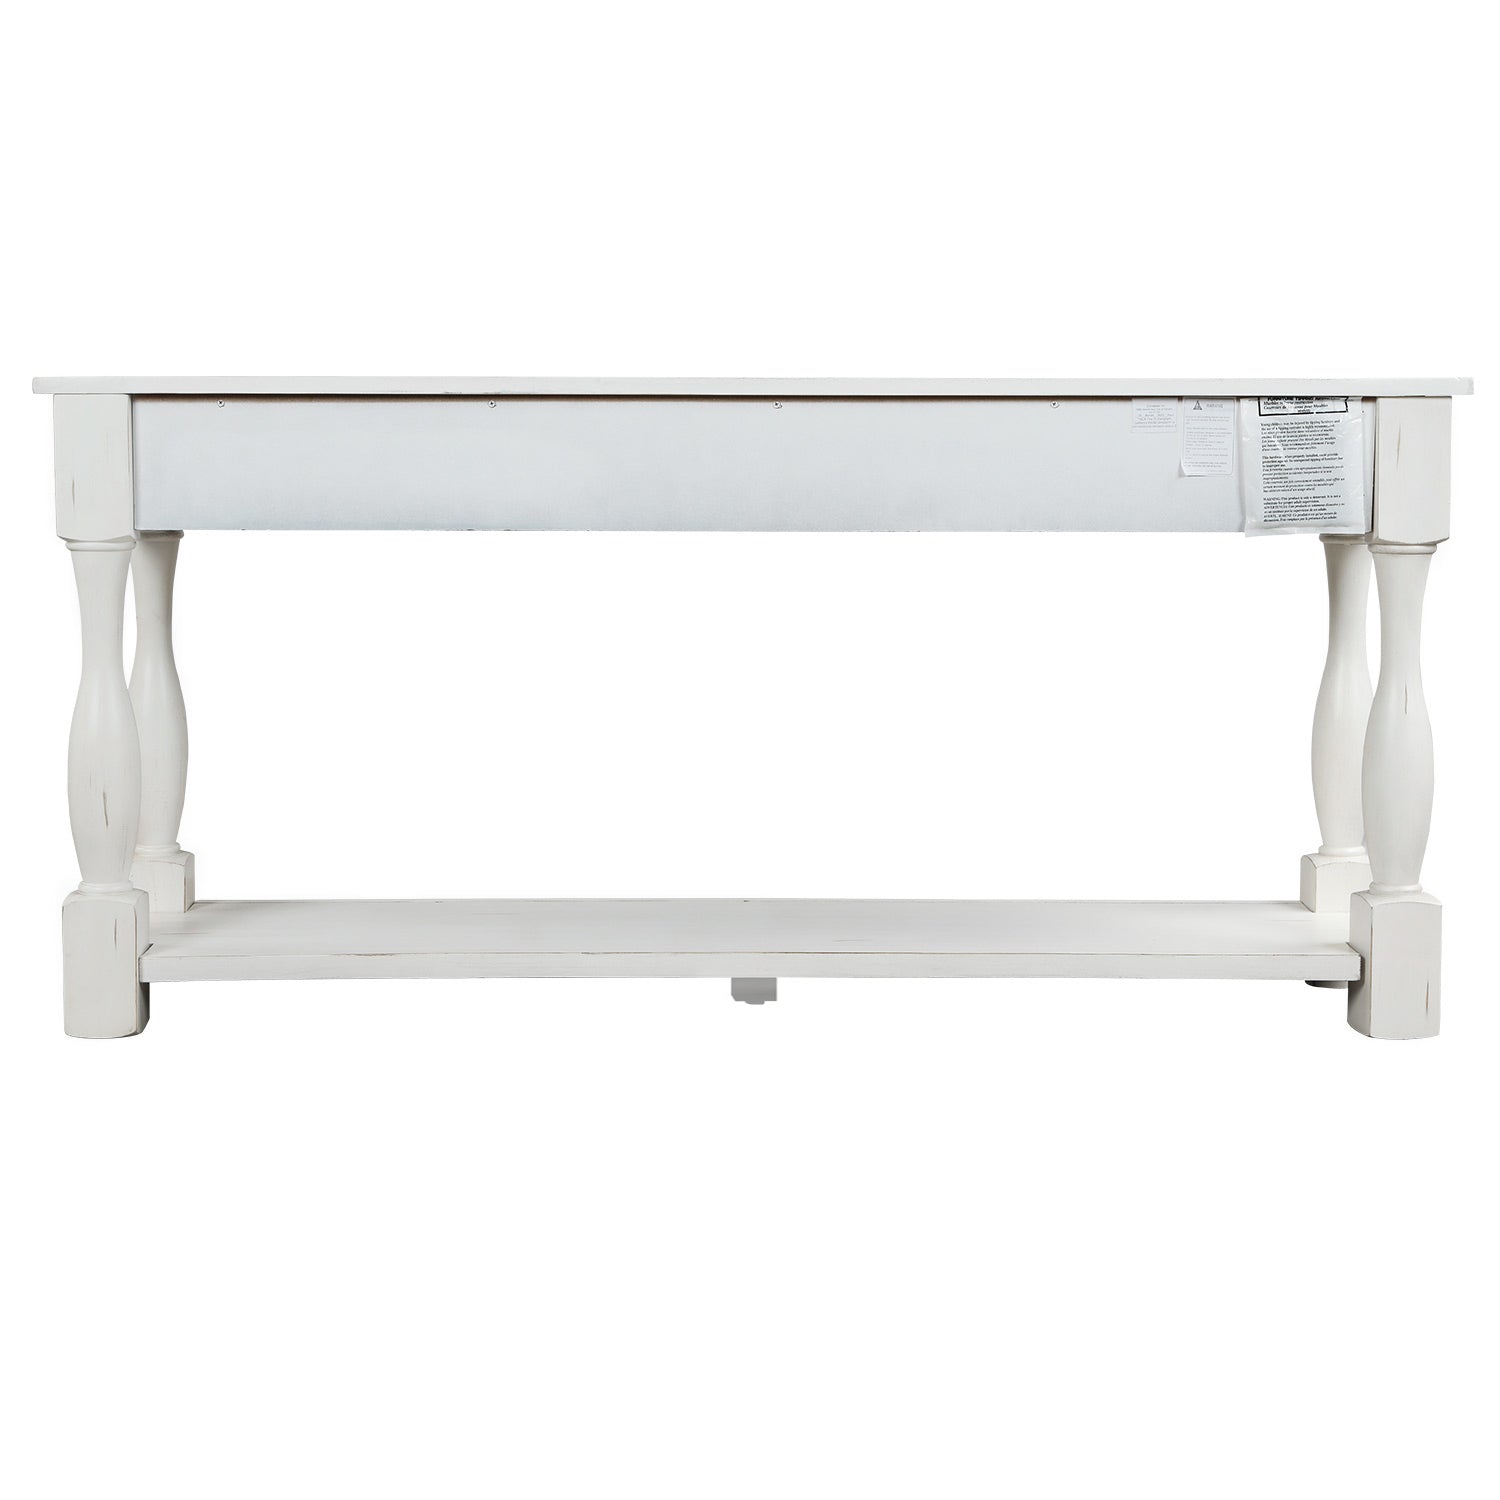 64" Console Table With storage and Shelf, Antique white color